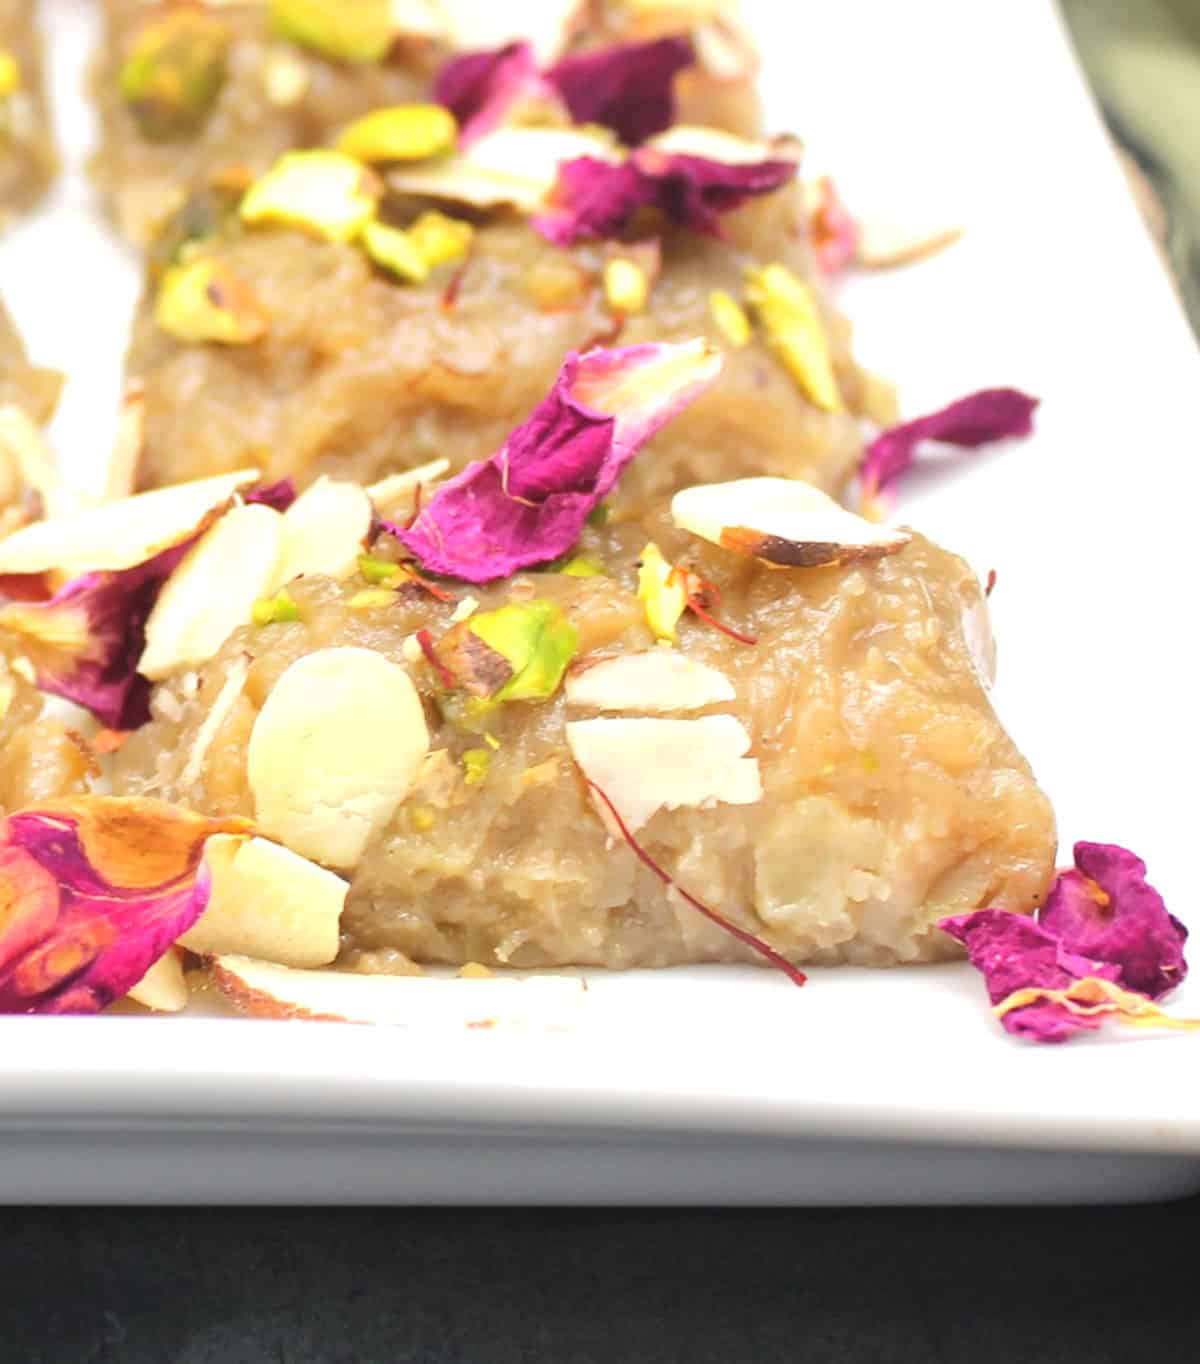 Vegan kalakand pieces on white plate with rose petals and nuts.